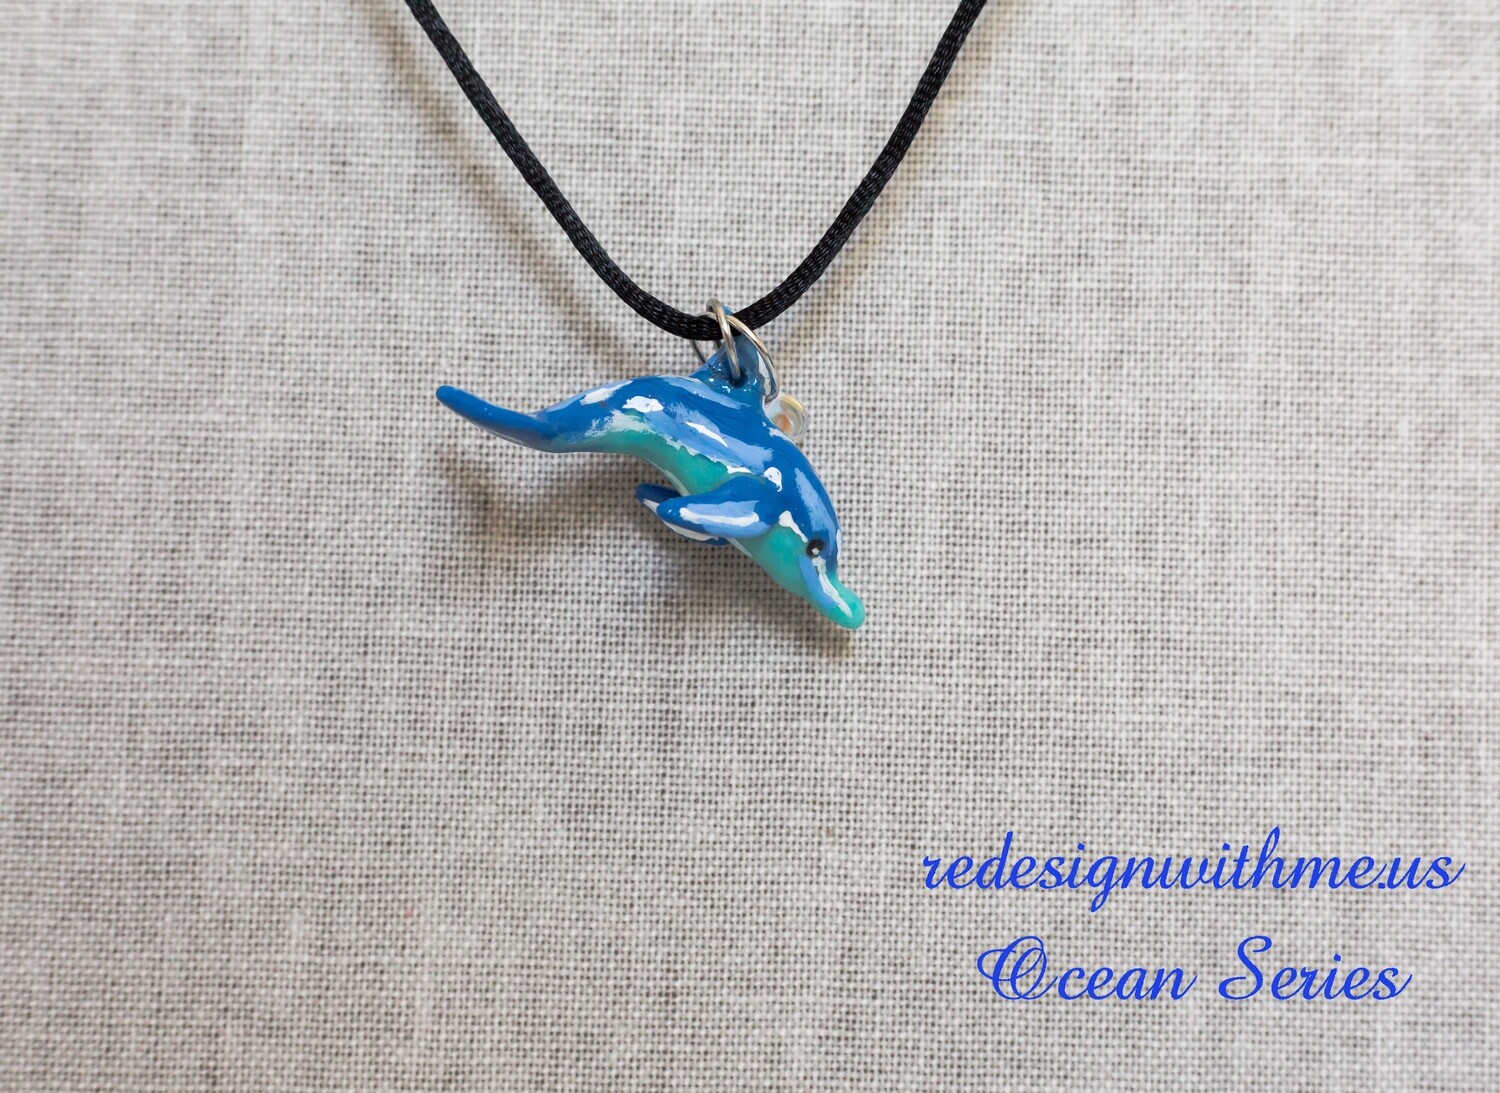 Dolphin necklace and earrings charms - donation to Oceanic Preservation Society